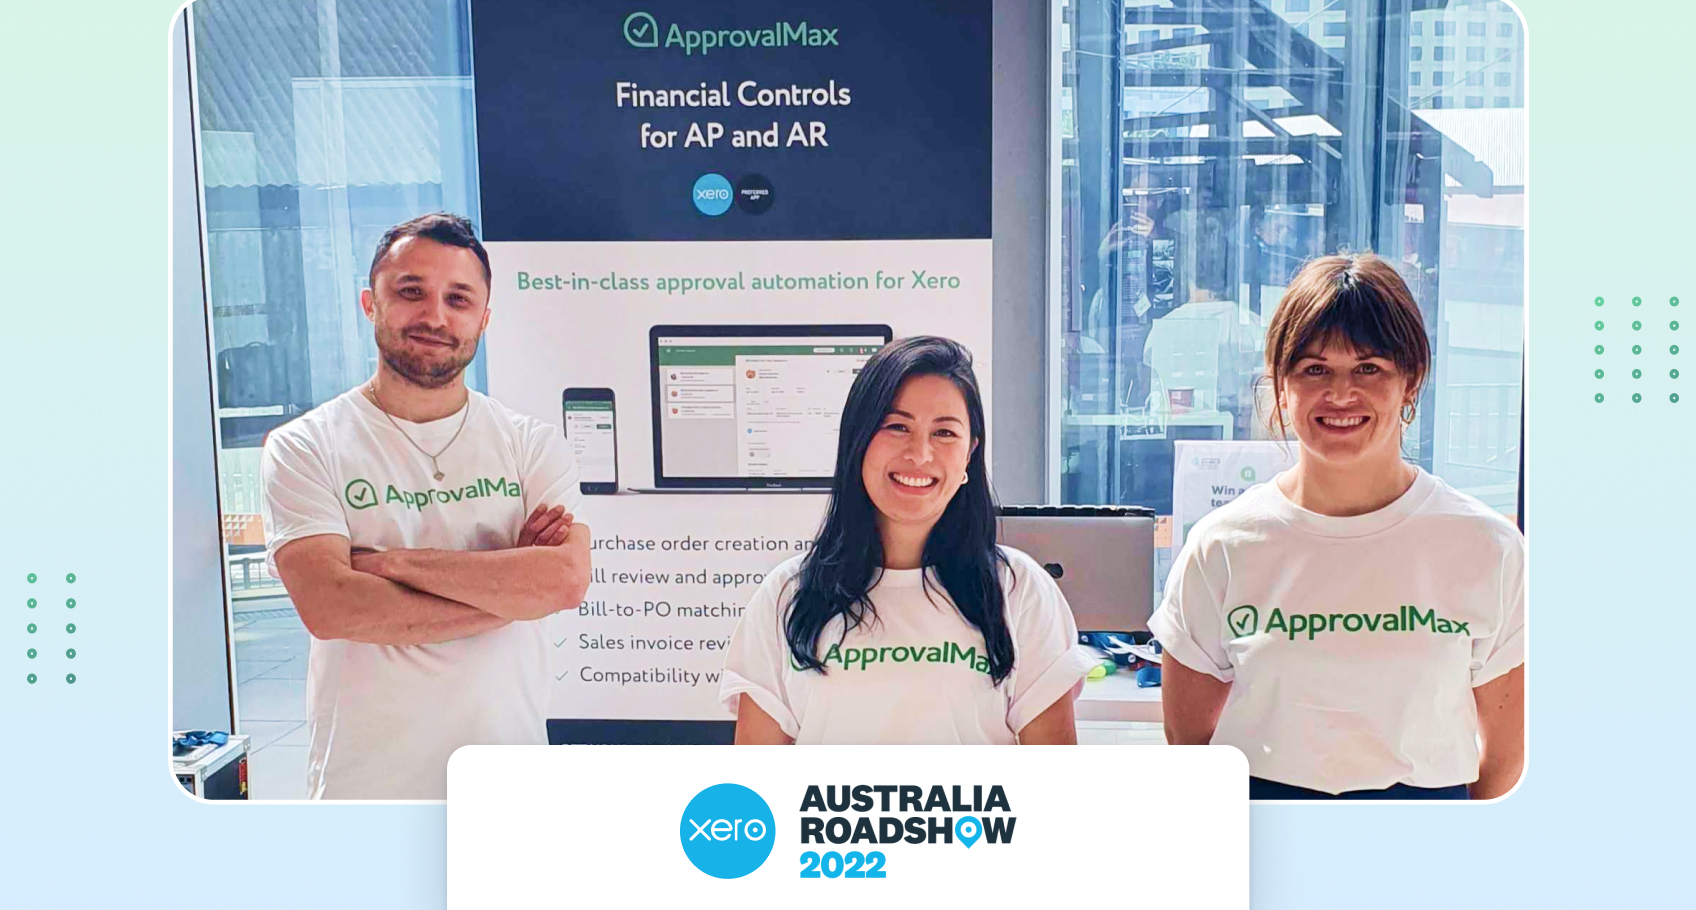 Three people wearing ApprovalMax-branded t-shirts stand in front of a branded banner at the Xero Roadshow 2022